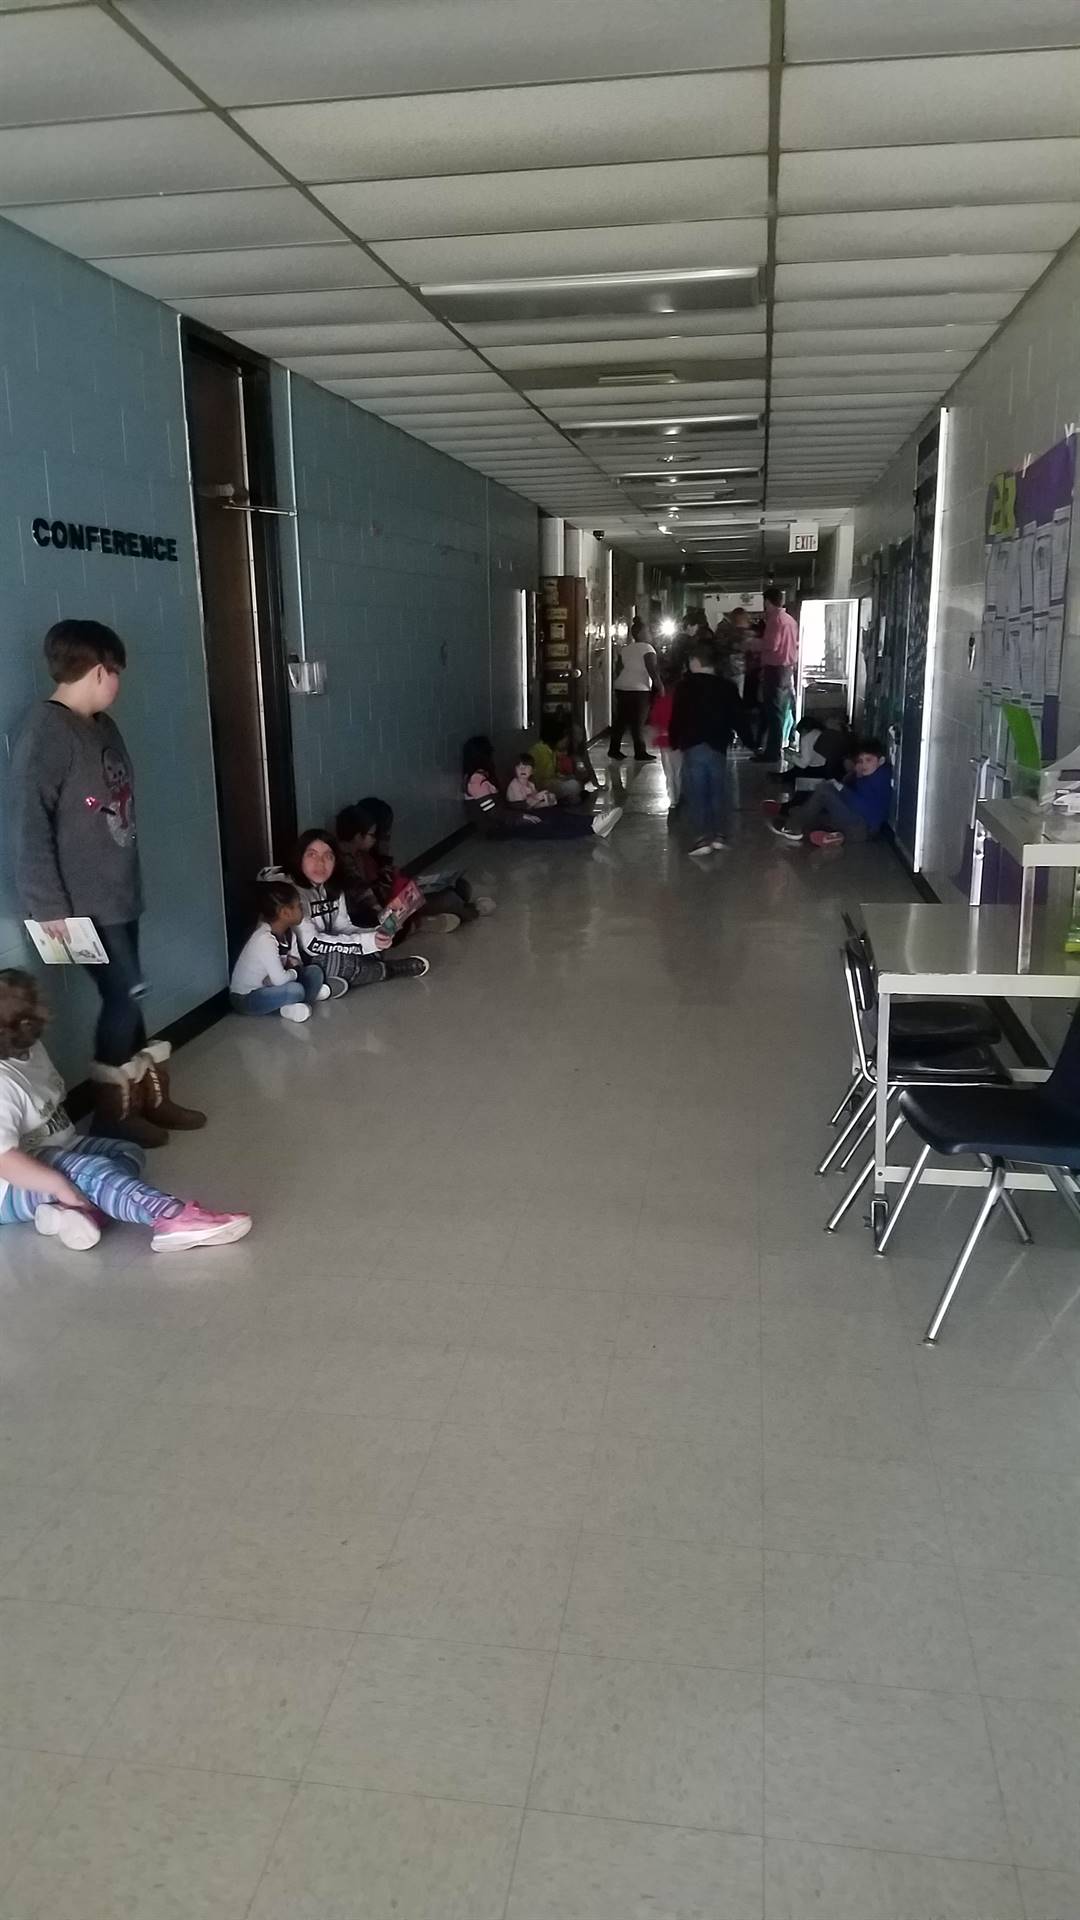 Reading in the hallway